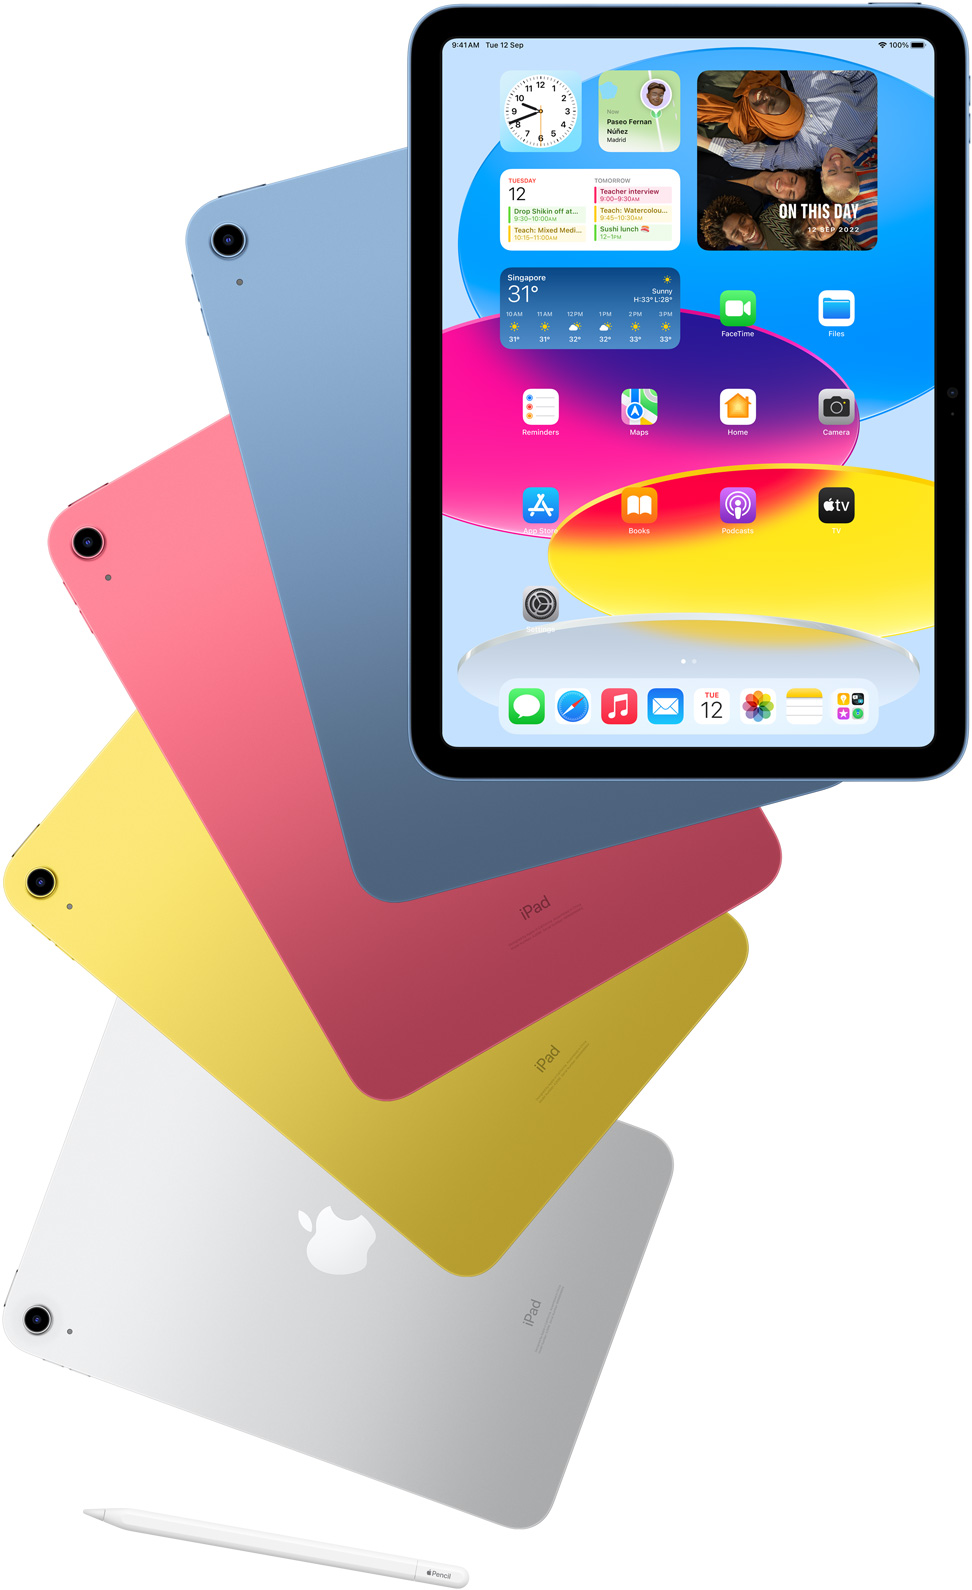 Front-view iPad shows home screen with blue, pink, yellow and silver rear-facing iPads behind it. An Apple Pencil sits near the arranged iPad models.